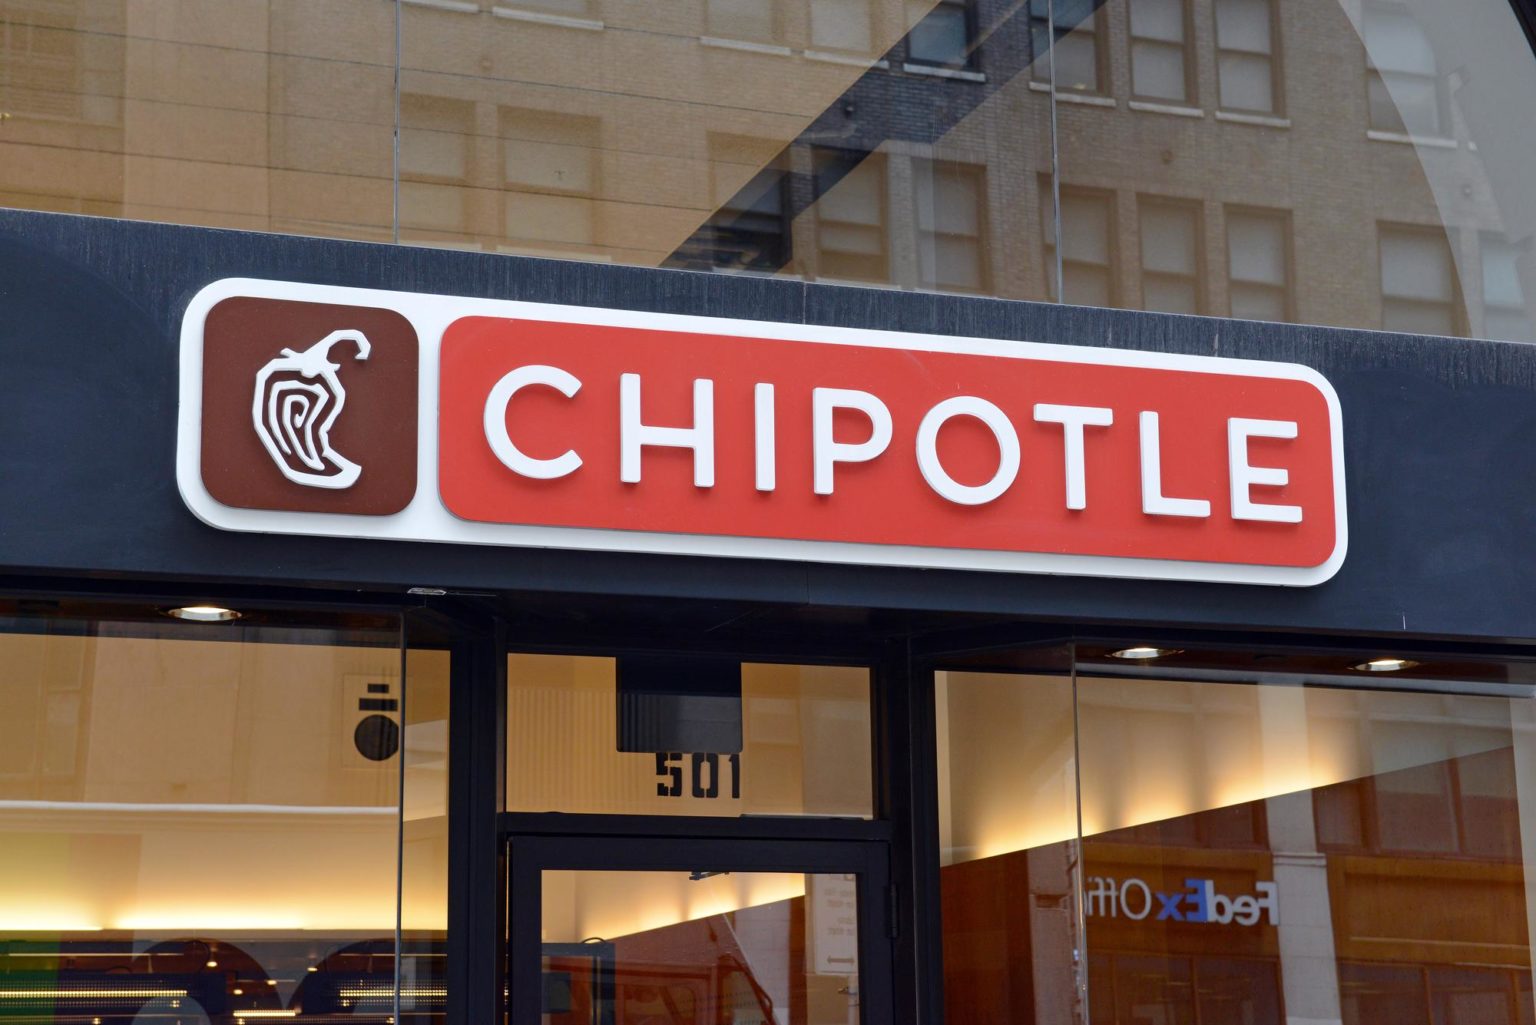 Chipotle Customers In Pa. Accuse Chain of ShortChanging Them Top